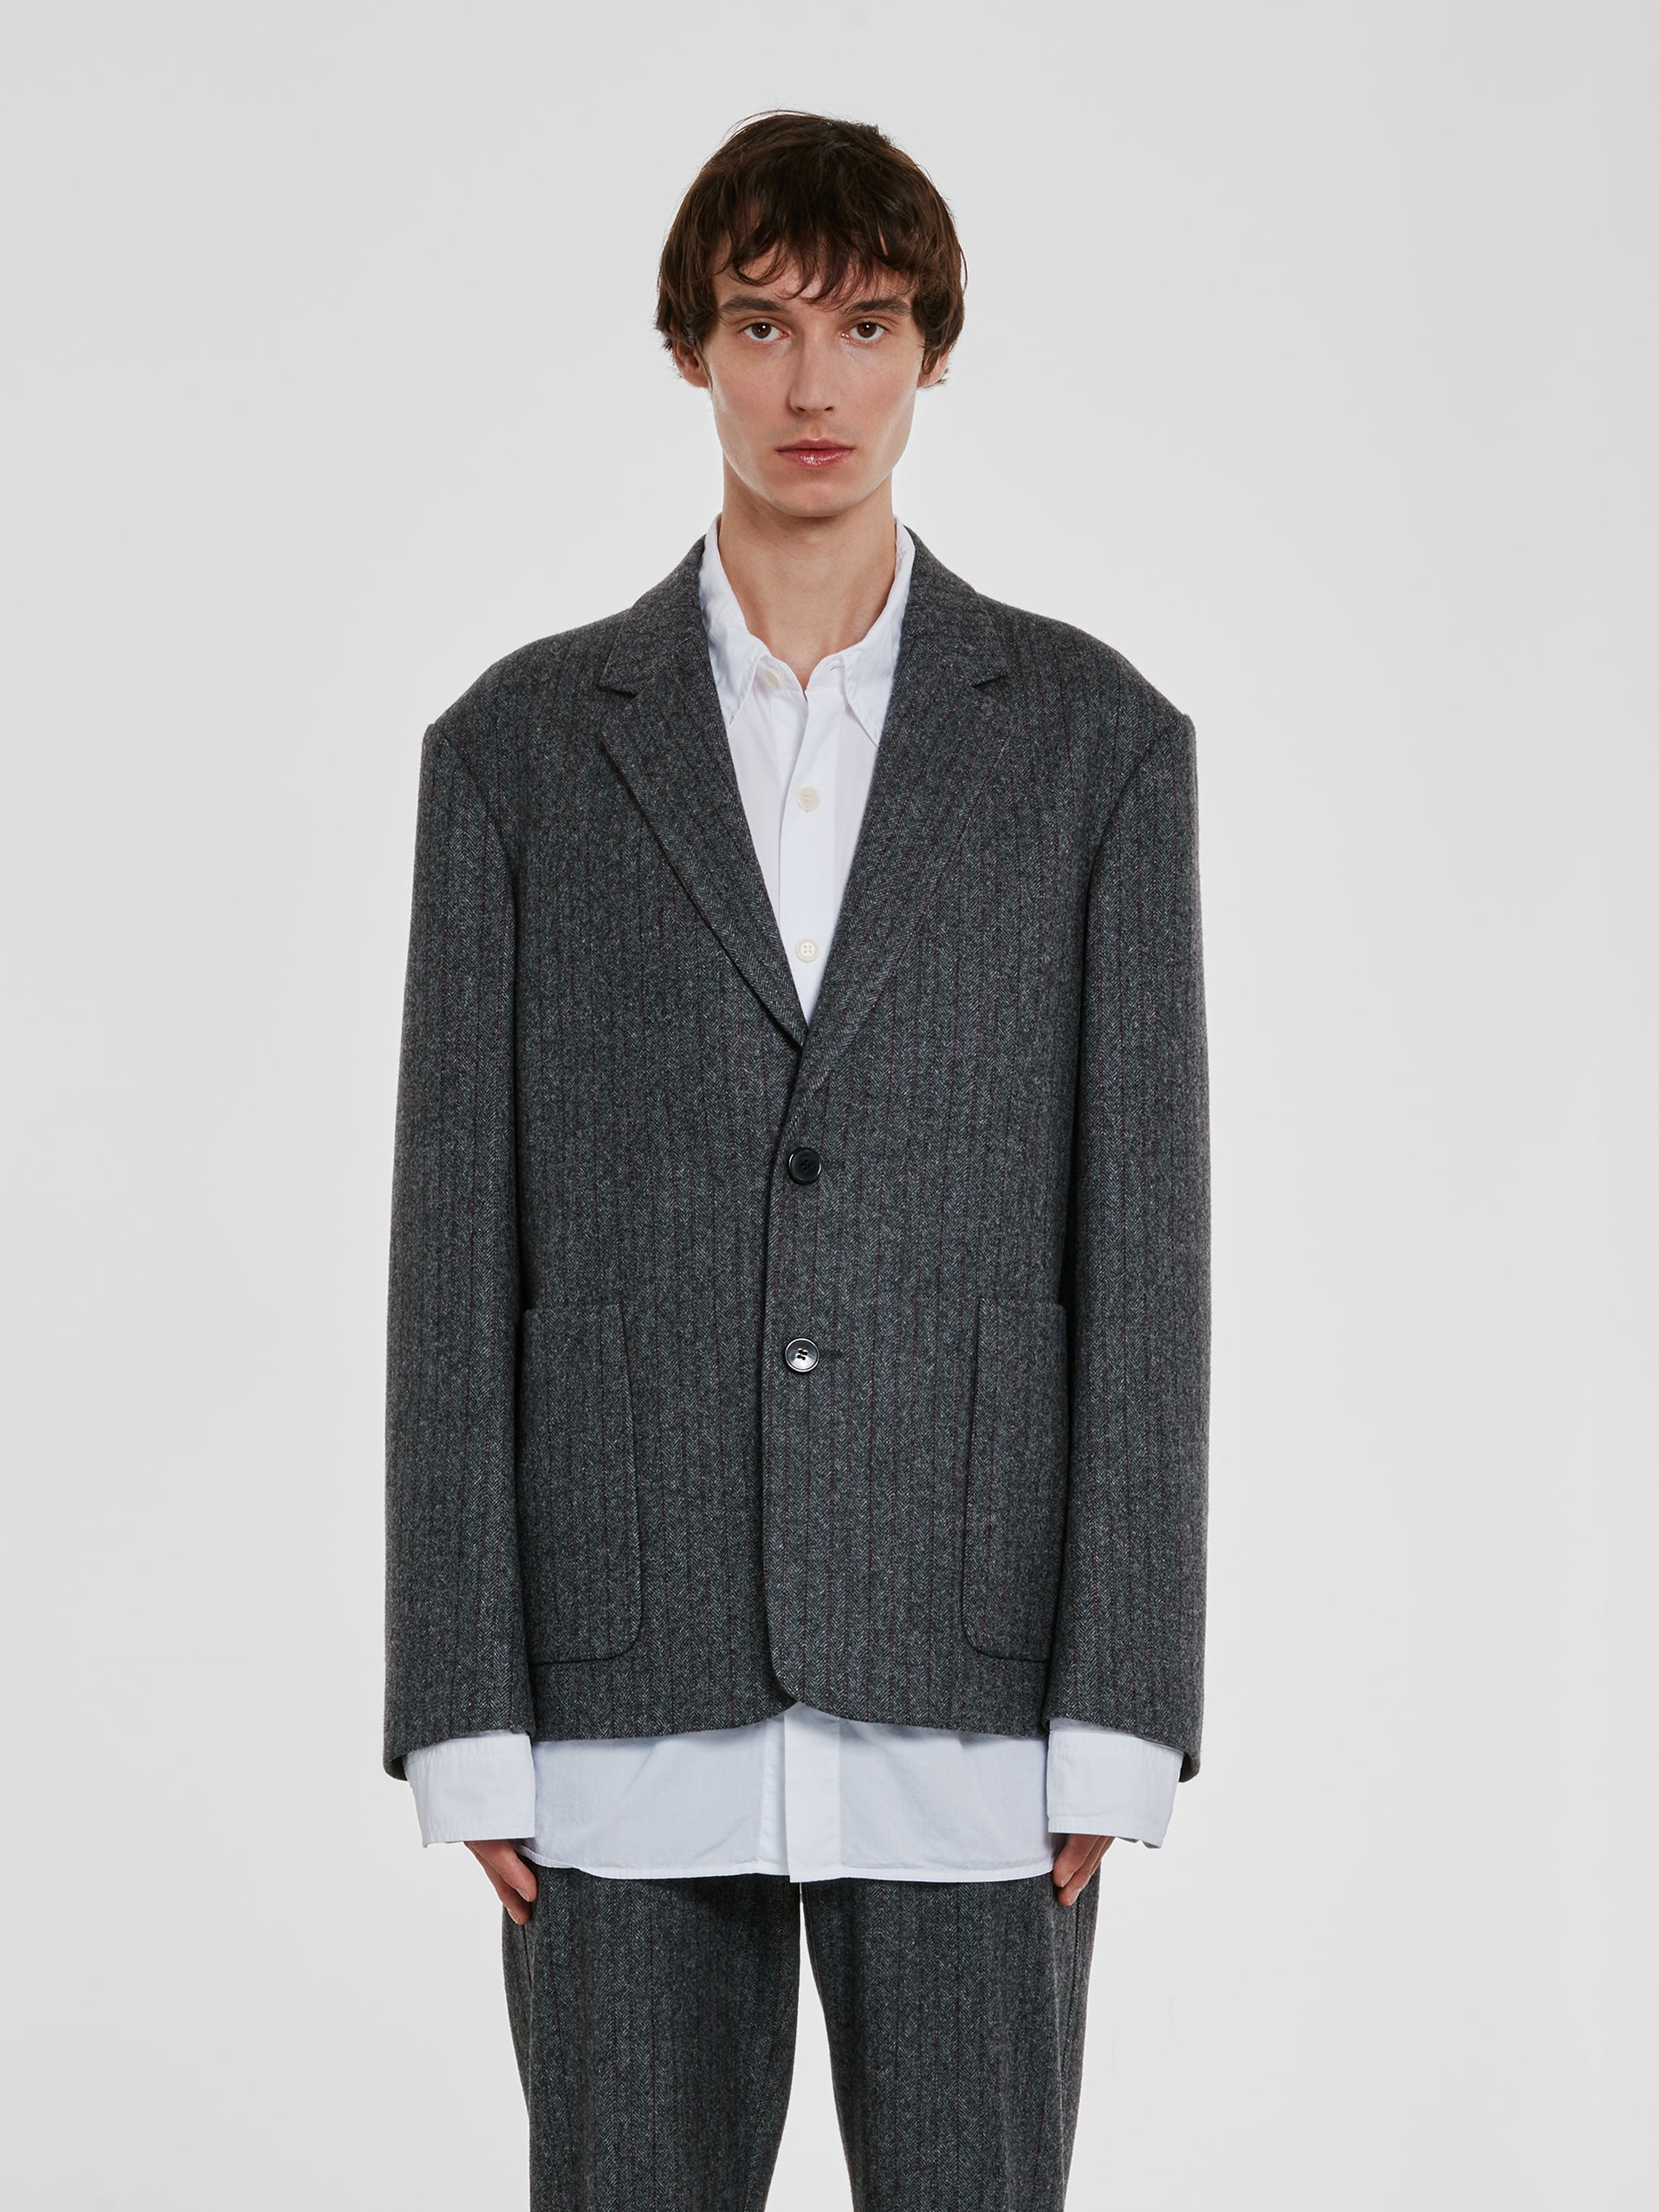 Dries Van Noten - Men’s Boxy Single Breasted Blazer With Patch Pockets - (Grey) view 1